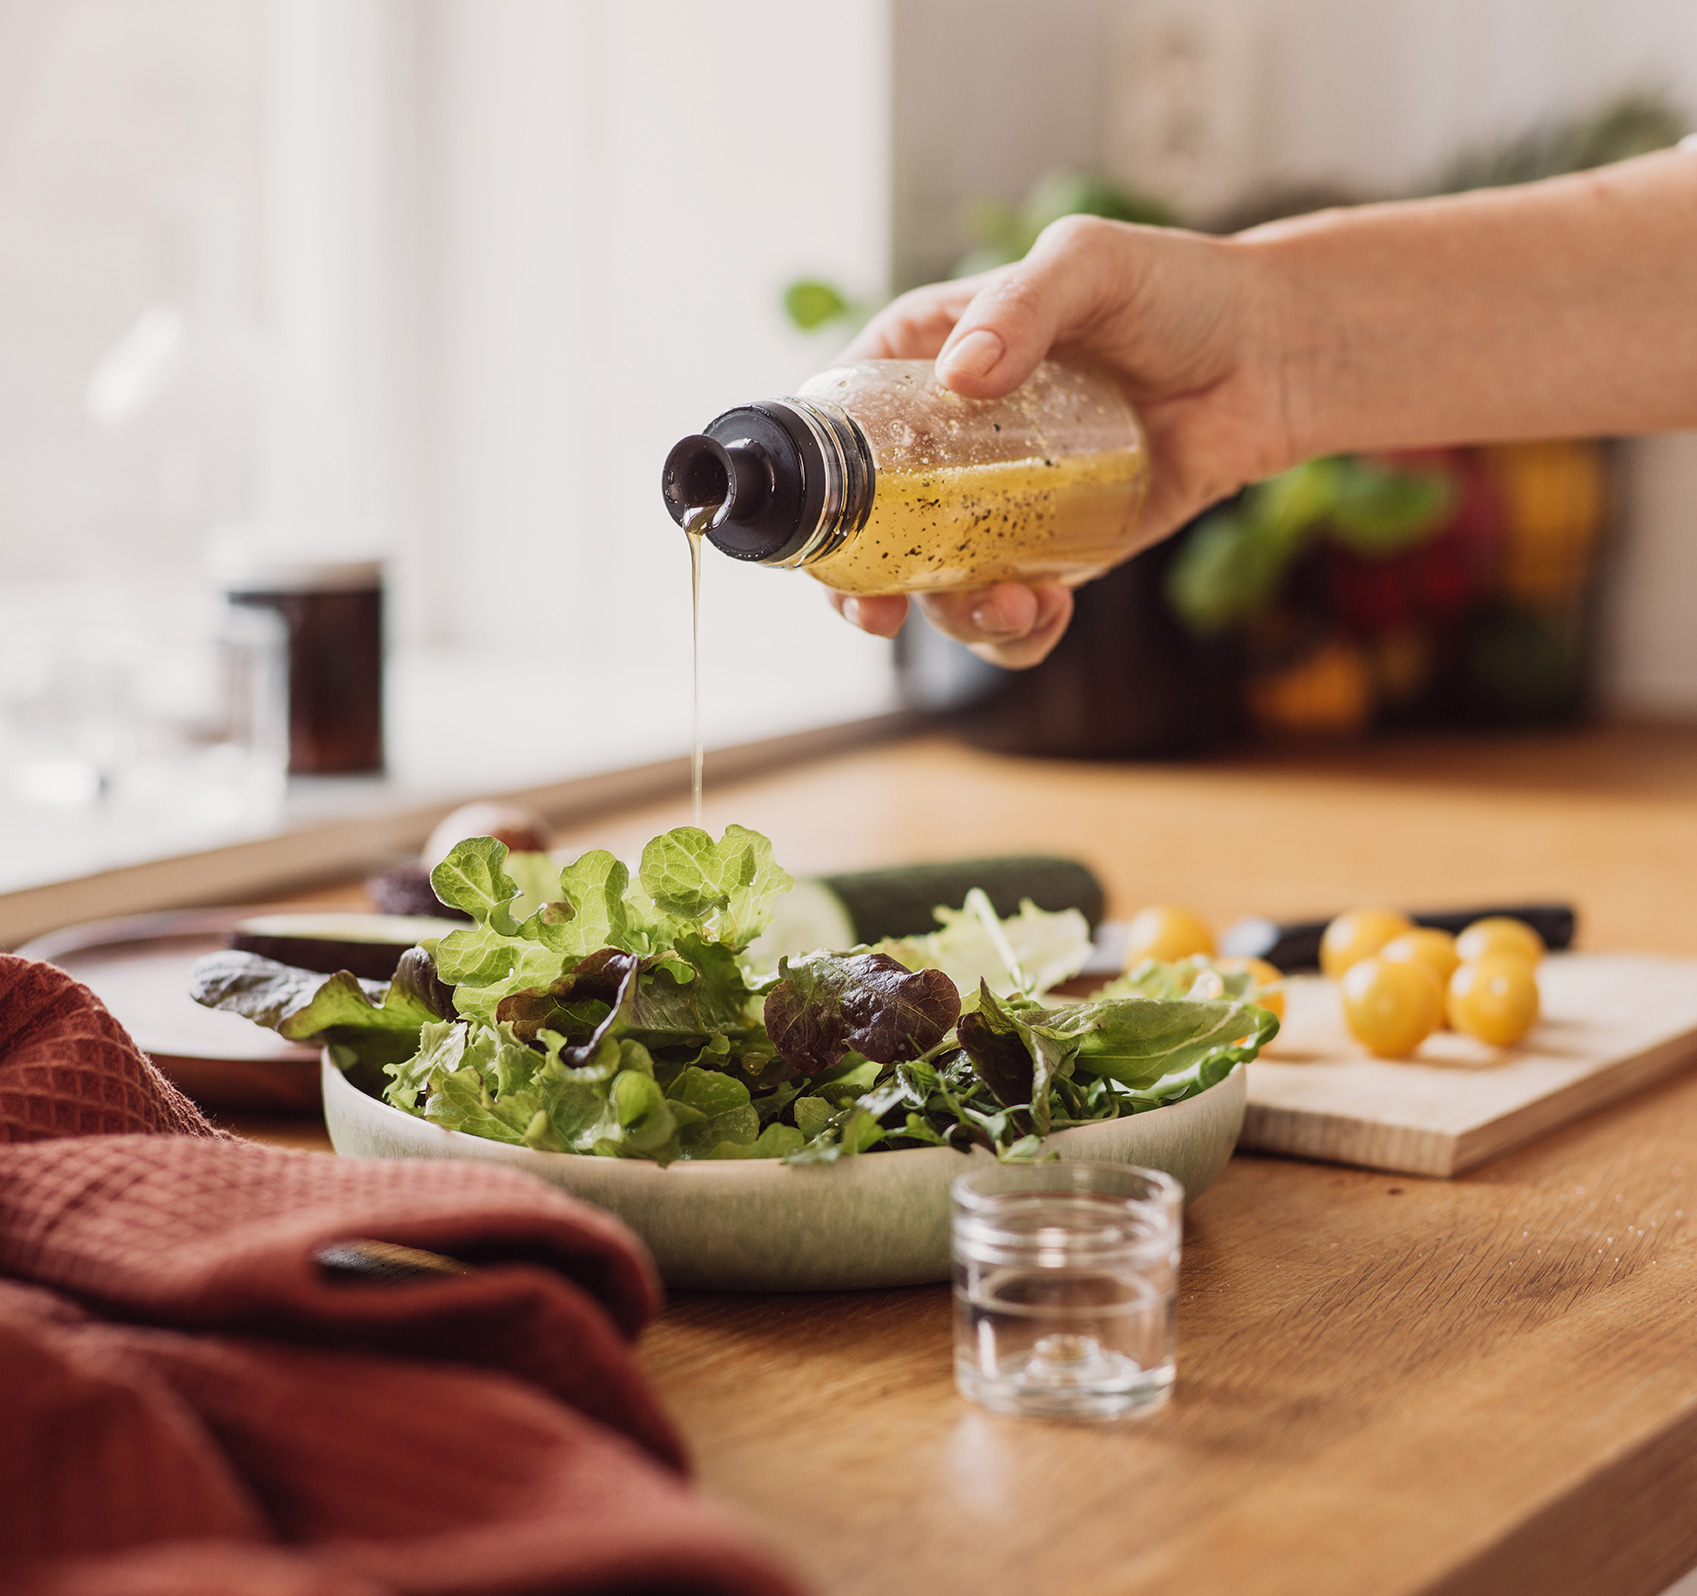 A hand pouring salad dressing onto a salad which sits on a white plate on a table next to a glass and cutting board